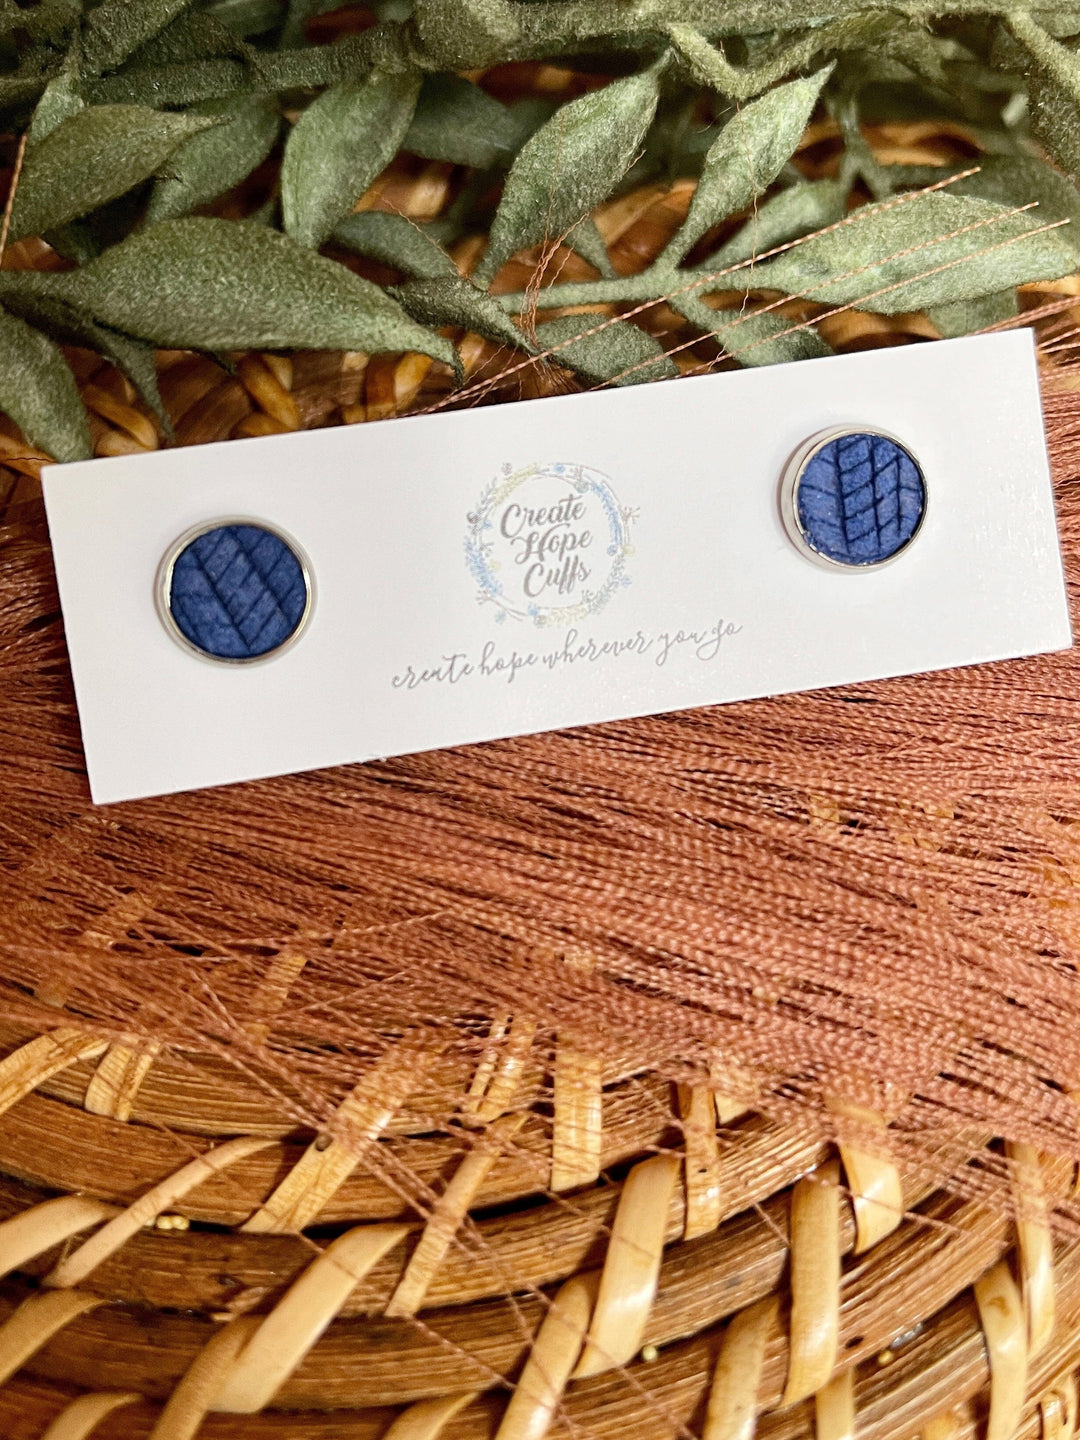 Textured STUD | 10mm | 12 Colors | Leather Earrings, Hypoallergenic Leather Earrings Create Hope Cuffs Light Navy 